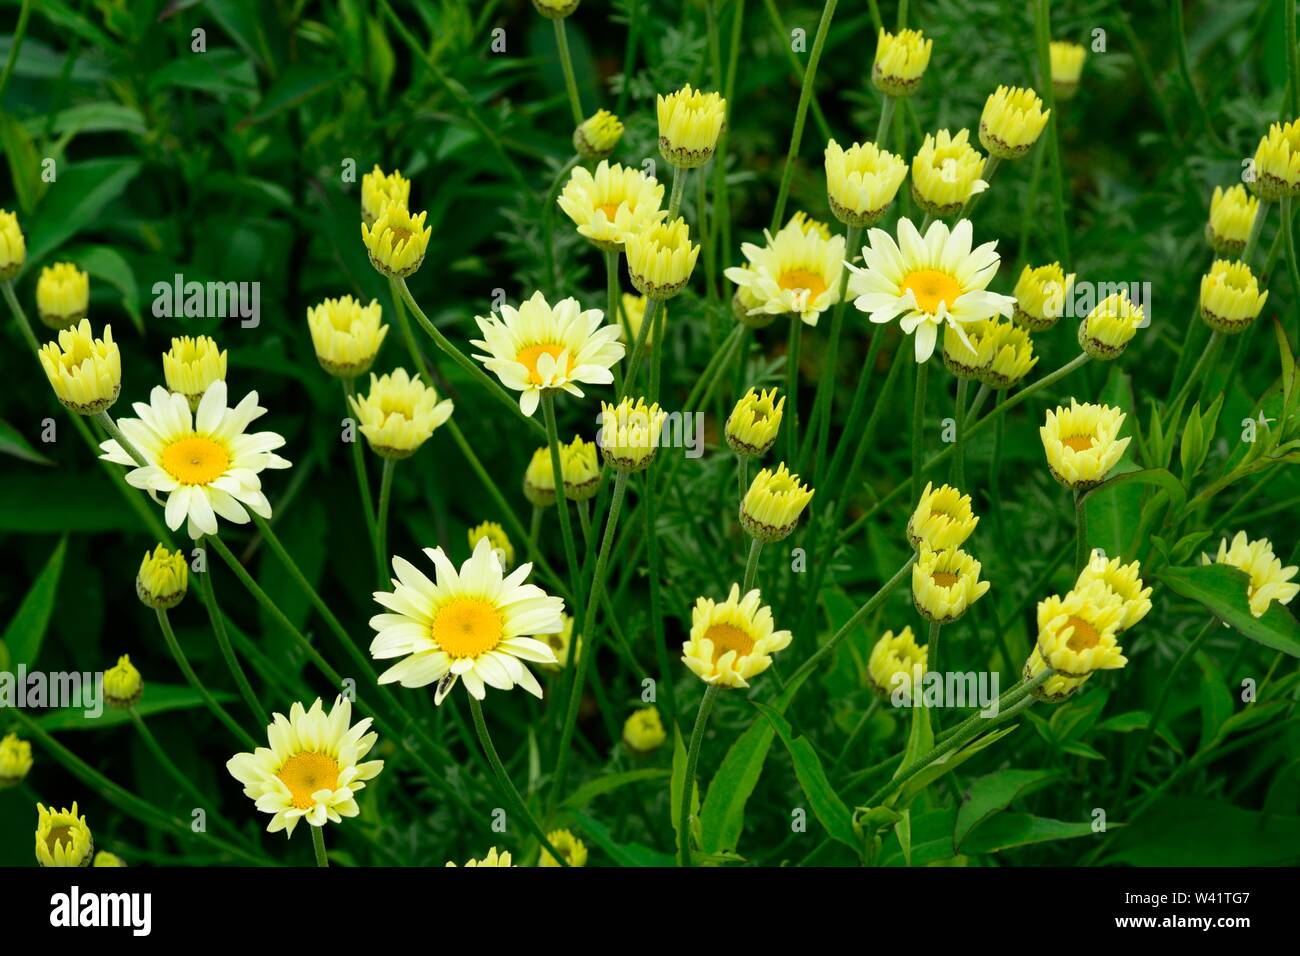 Anthemis tincotoria Sauce Hollandaise flowers flower Dyers chamomile soft yellow daisies above fern like aromatic leaves Stock Photo